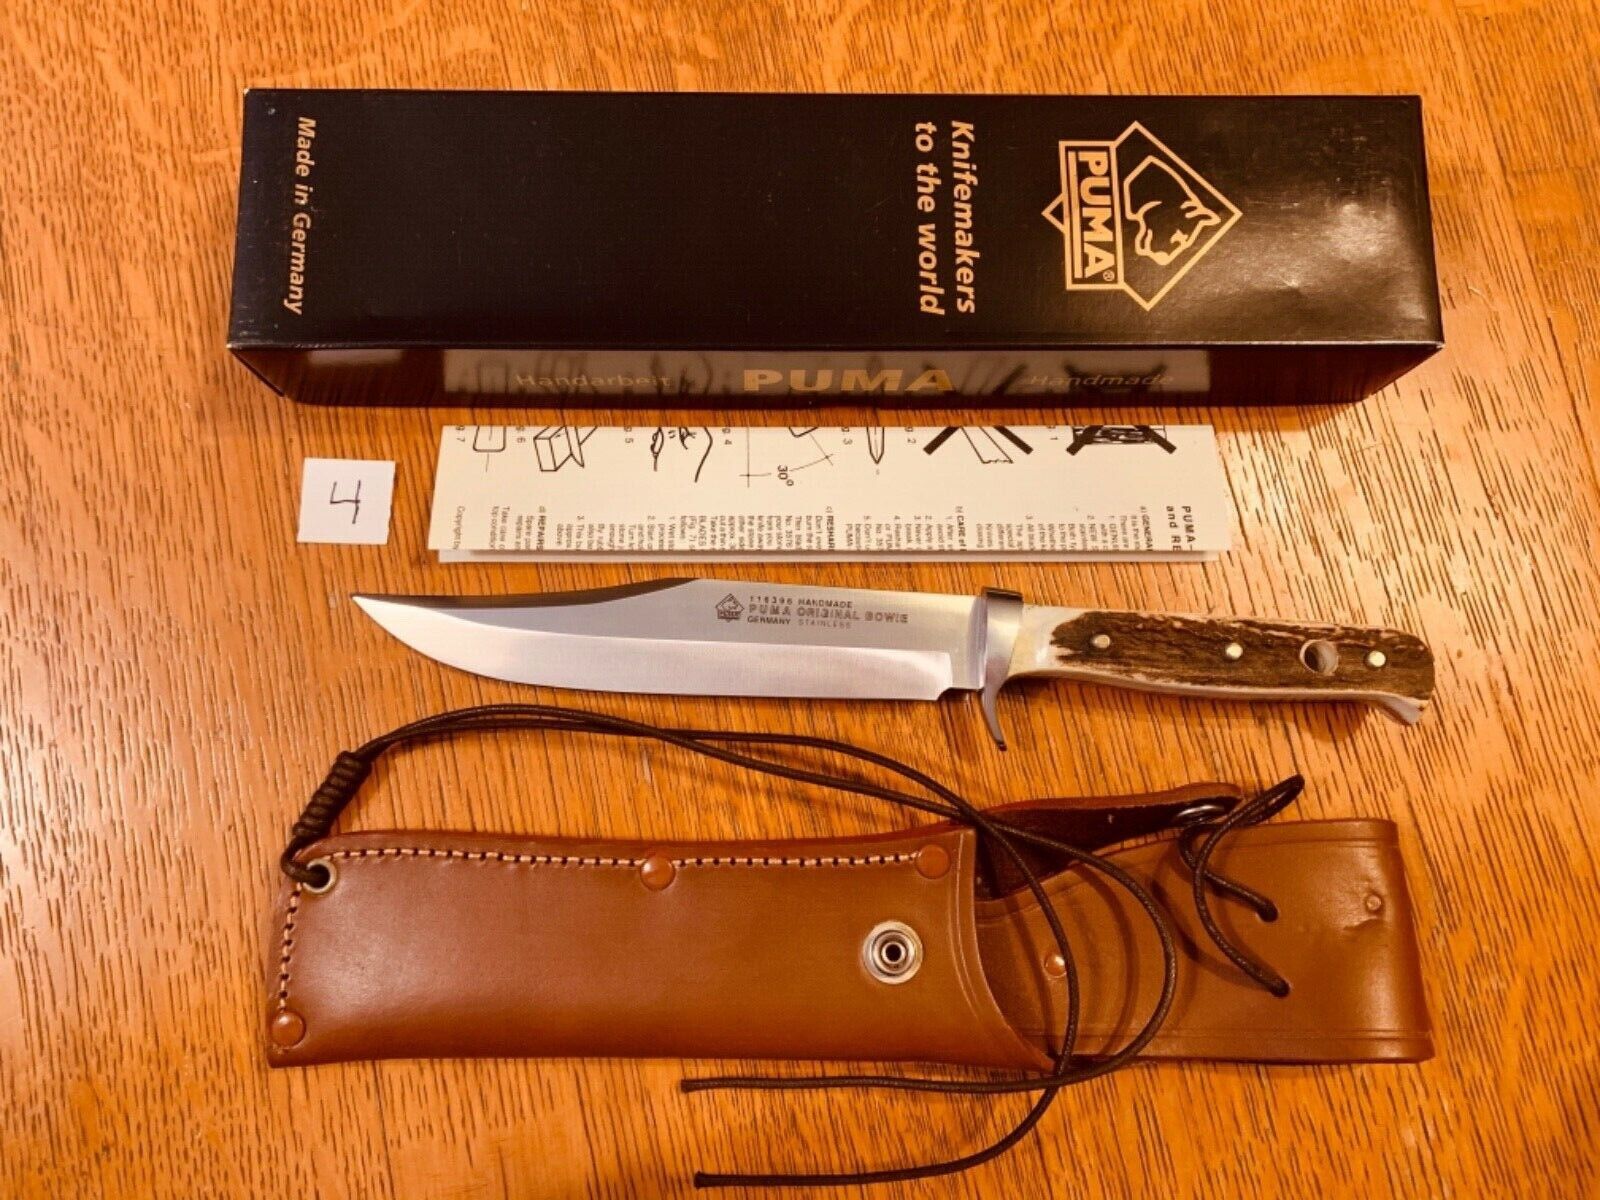 PUMA Bowie 6396 Knife New with Box and Leather Sheath Date Code 35101 (2001)